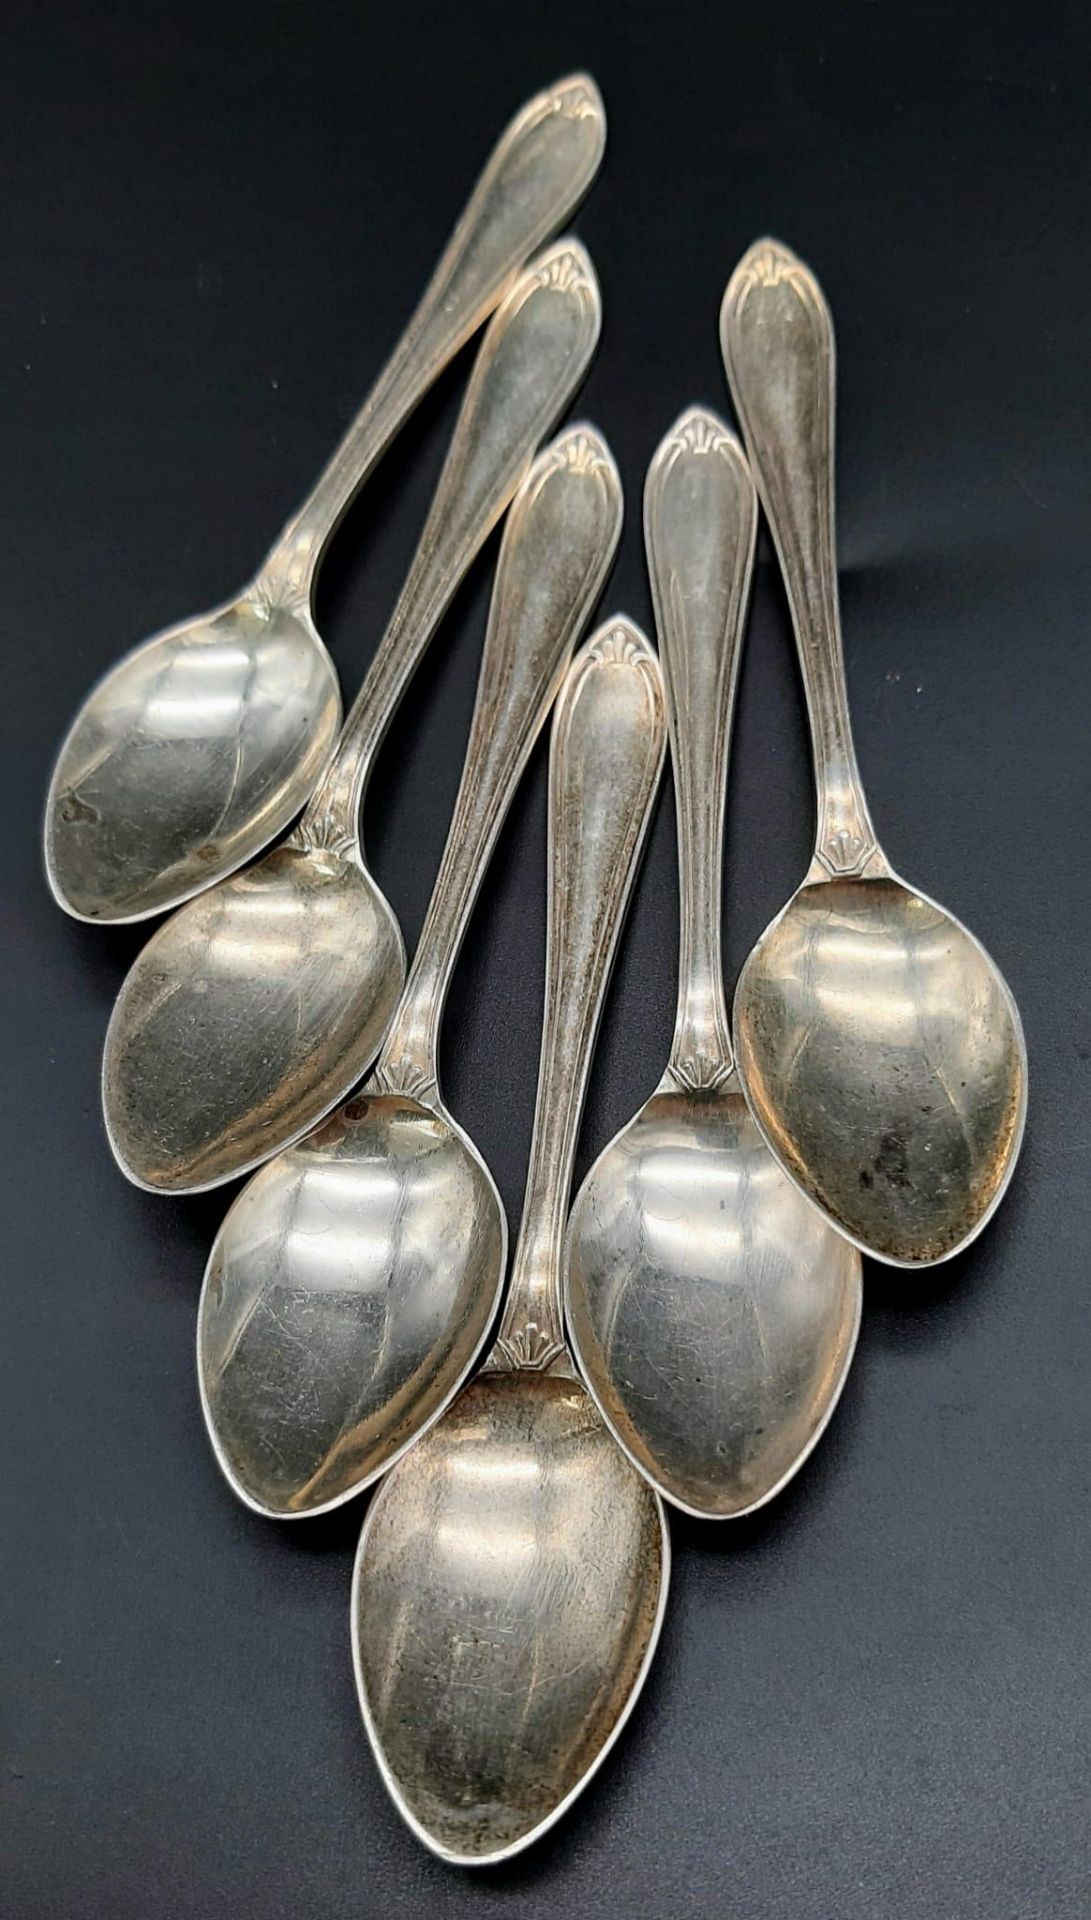 A Small Antique 925 Silver Tankard Dedicated to Jane with Six 925 Silver Teaspoons. Tankard - London - Image 8 of 10